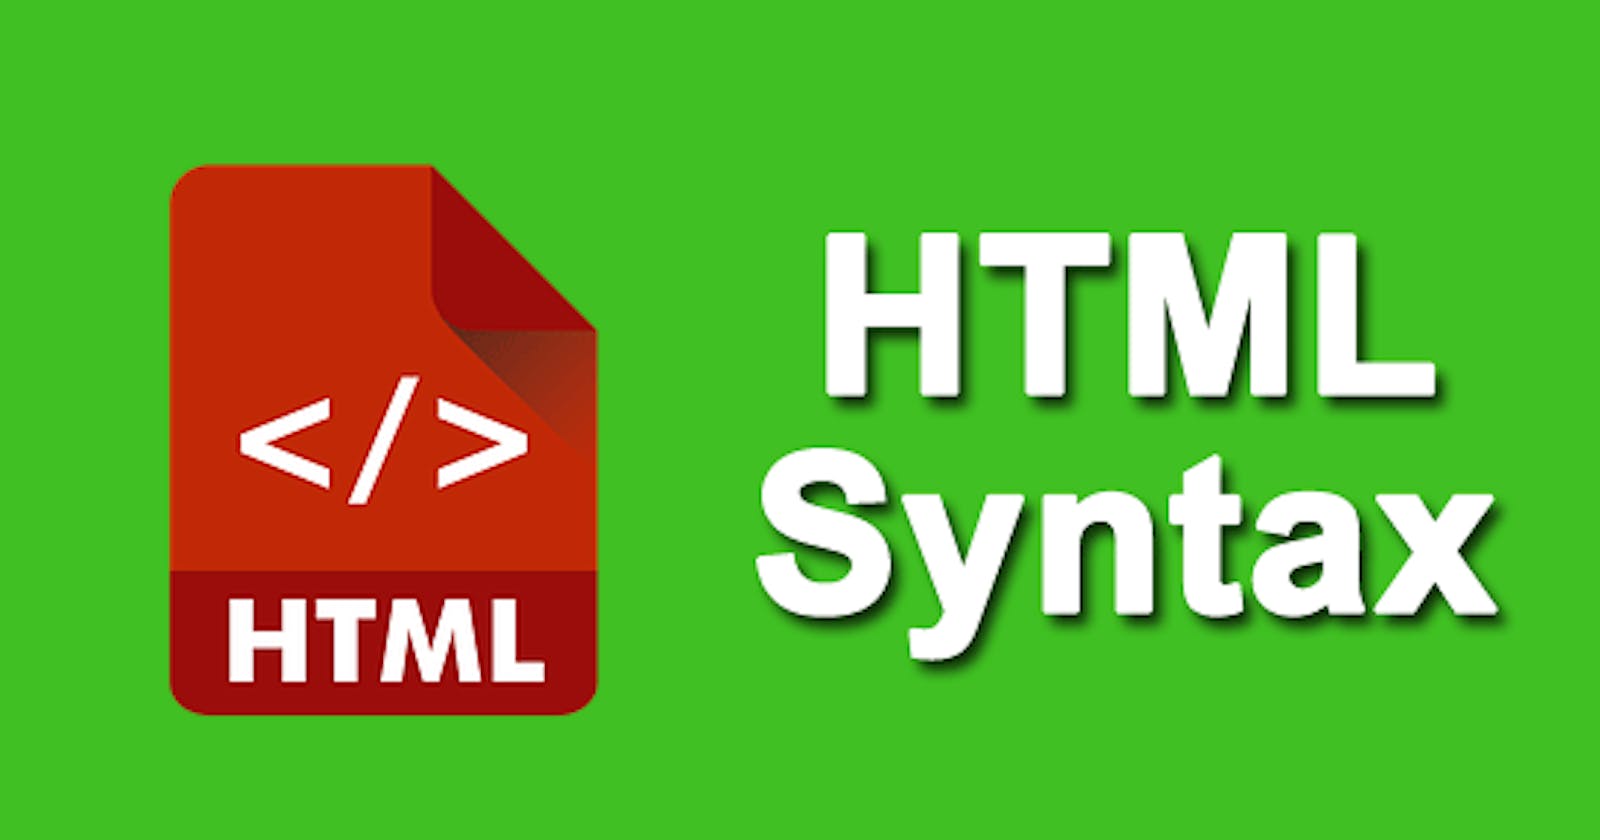 Understanding The HTML Syntax: Tags, Elements, Comments, Attributes and HTML Entities